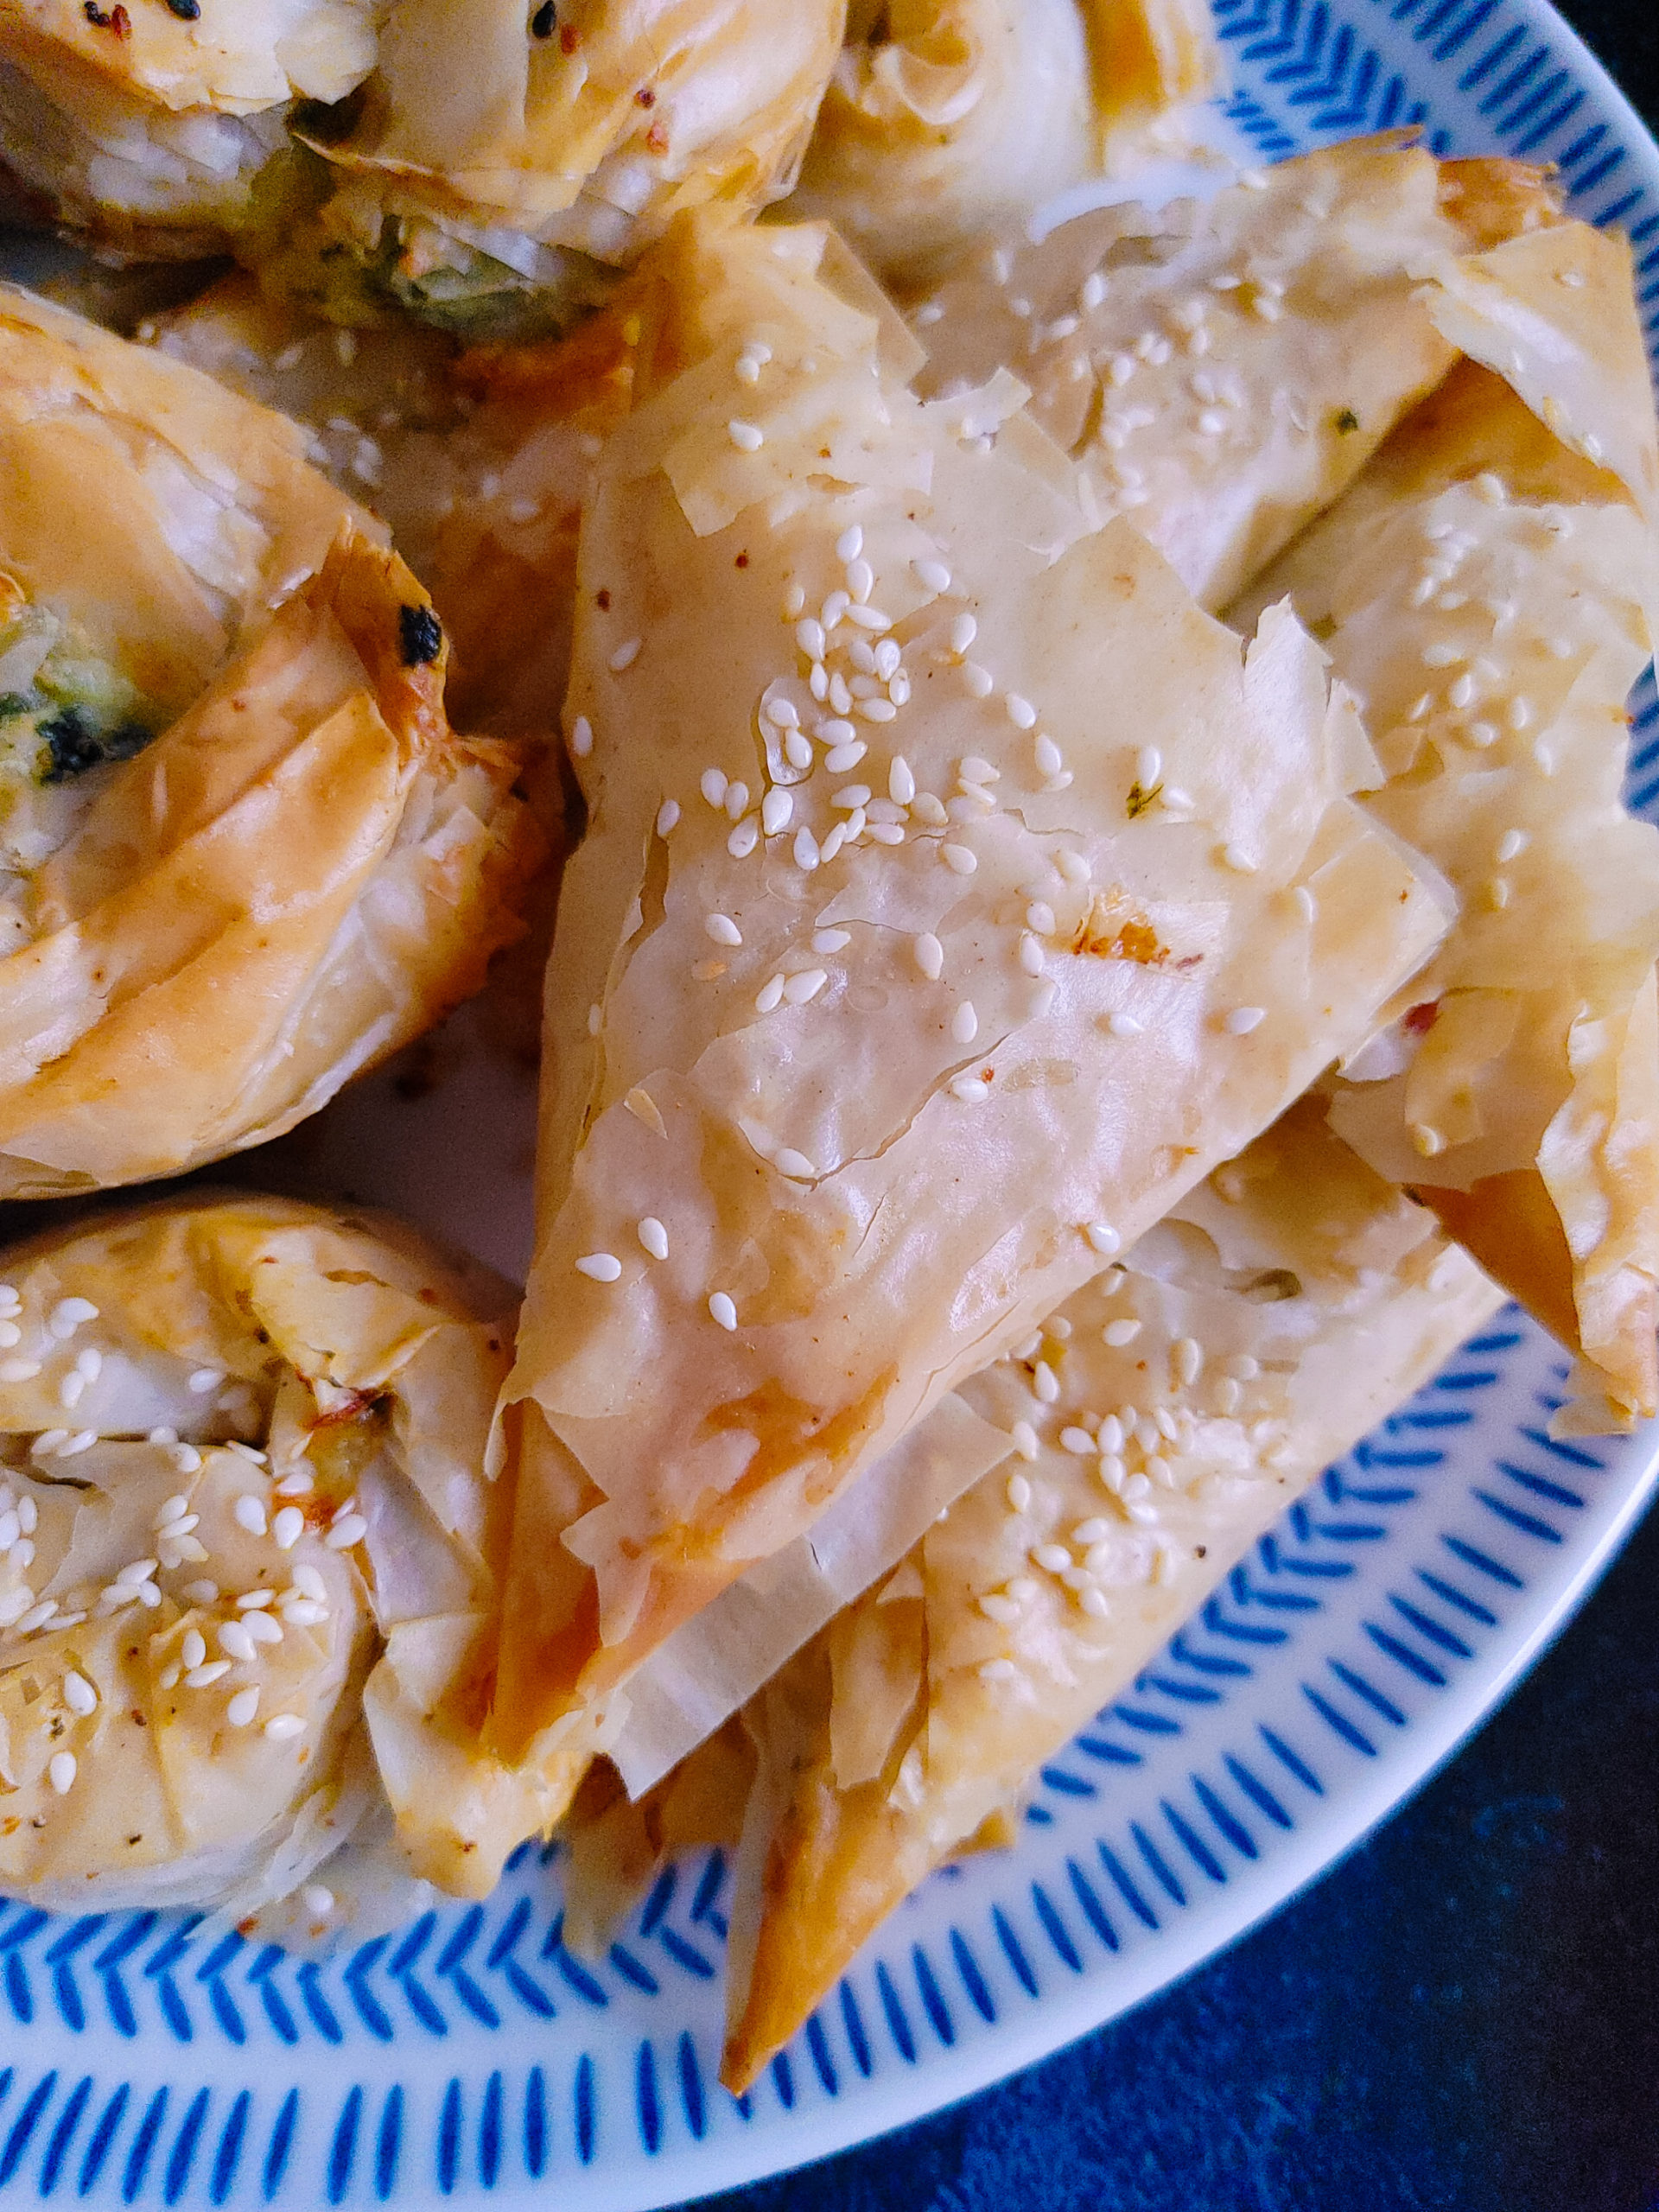 BAKED SPINACH AND FETA PHYLLO APPETIZERS